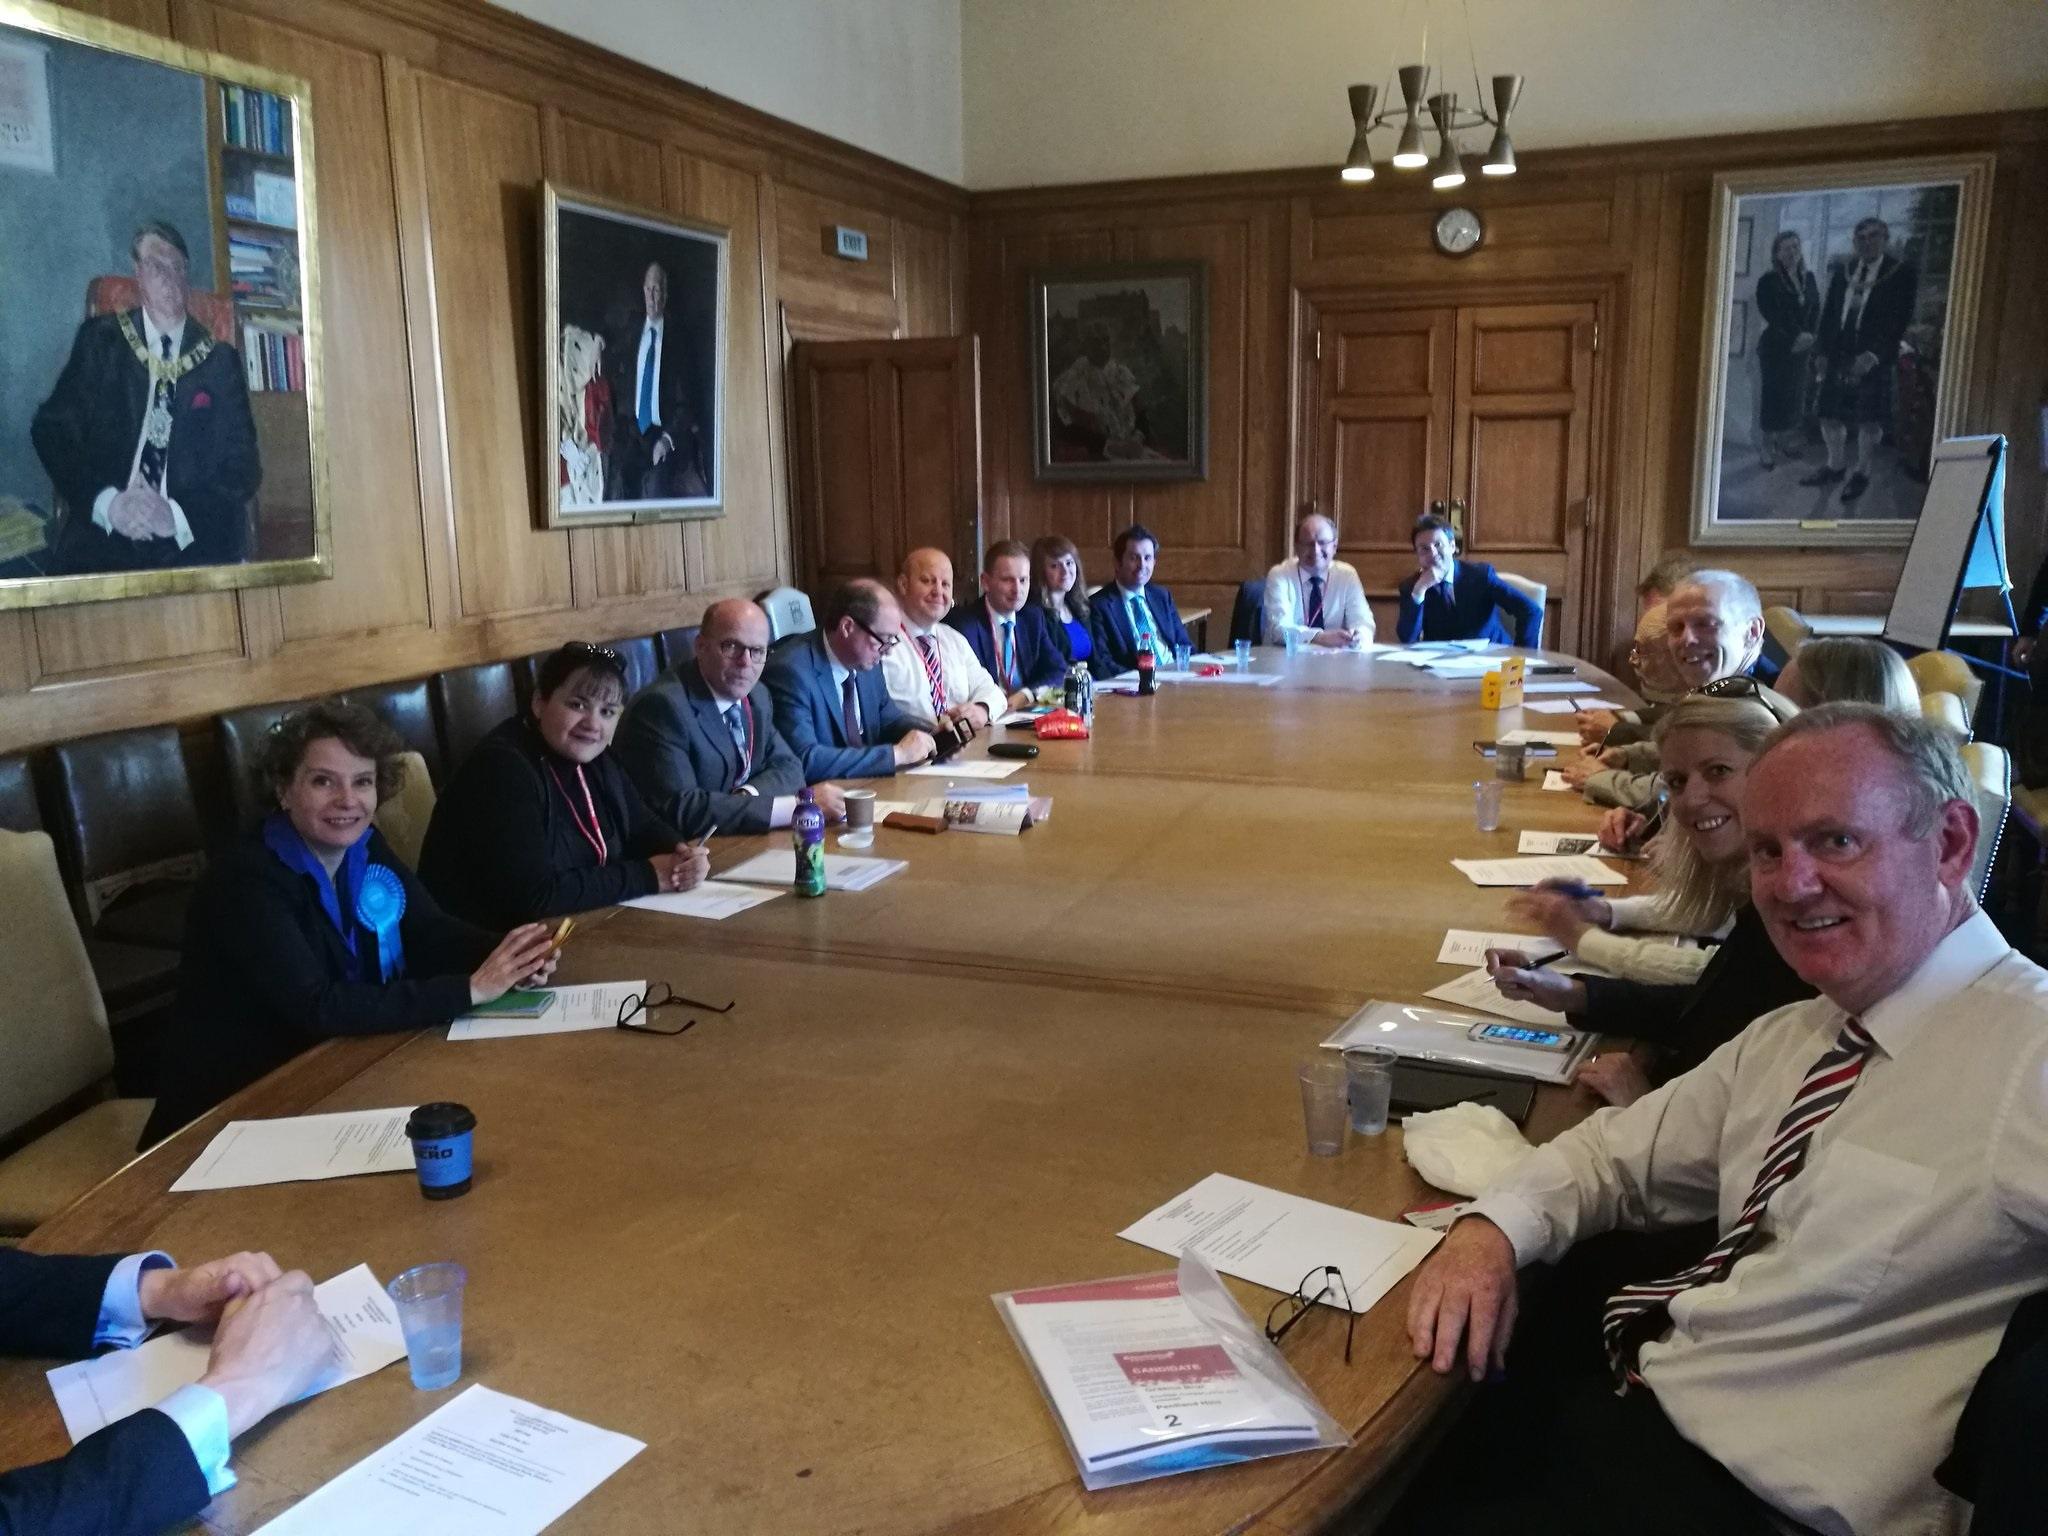 The new Edinburgh Conservative Group meeting for the first time at City Chambers